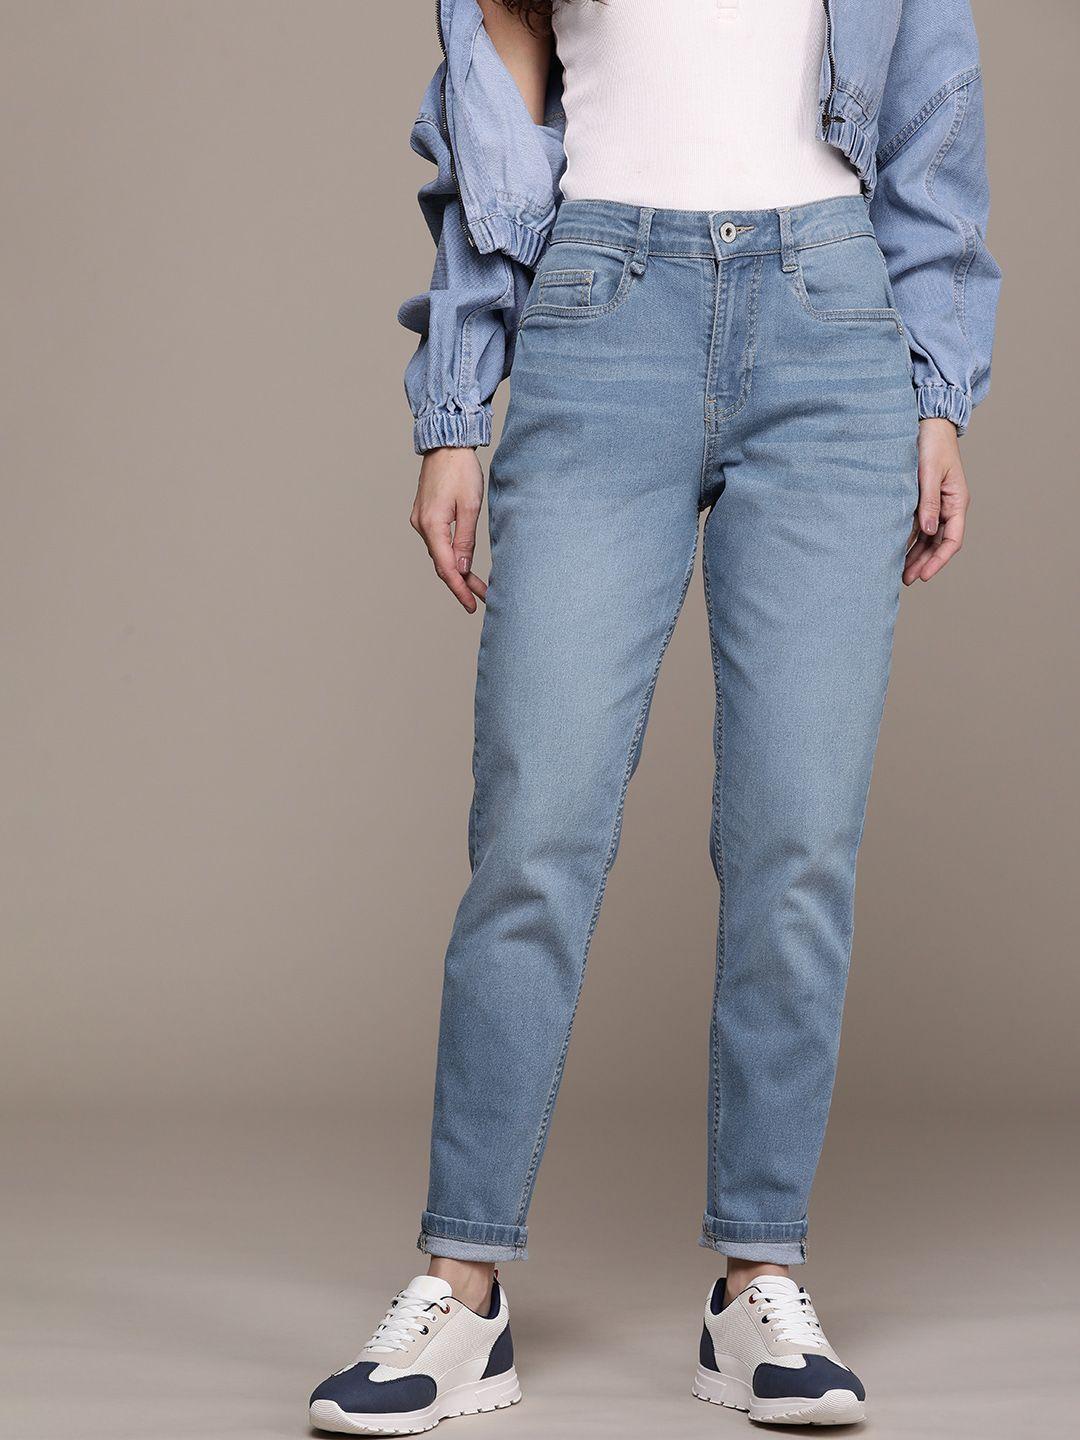 the-roadster-life-co.-women-mom-fit-light-fade-stretchable-jeans